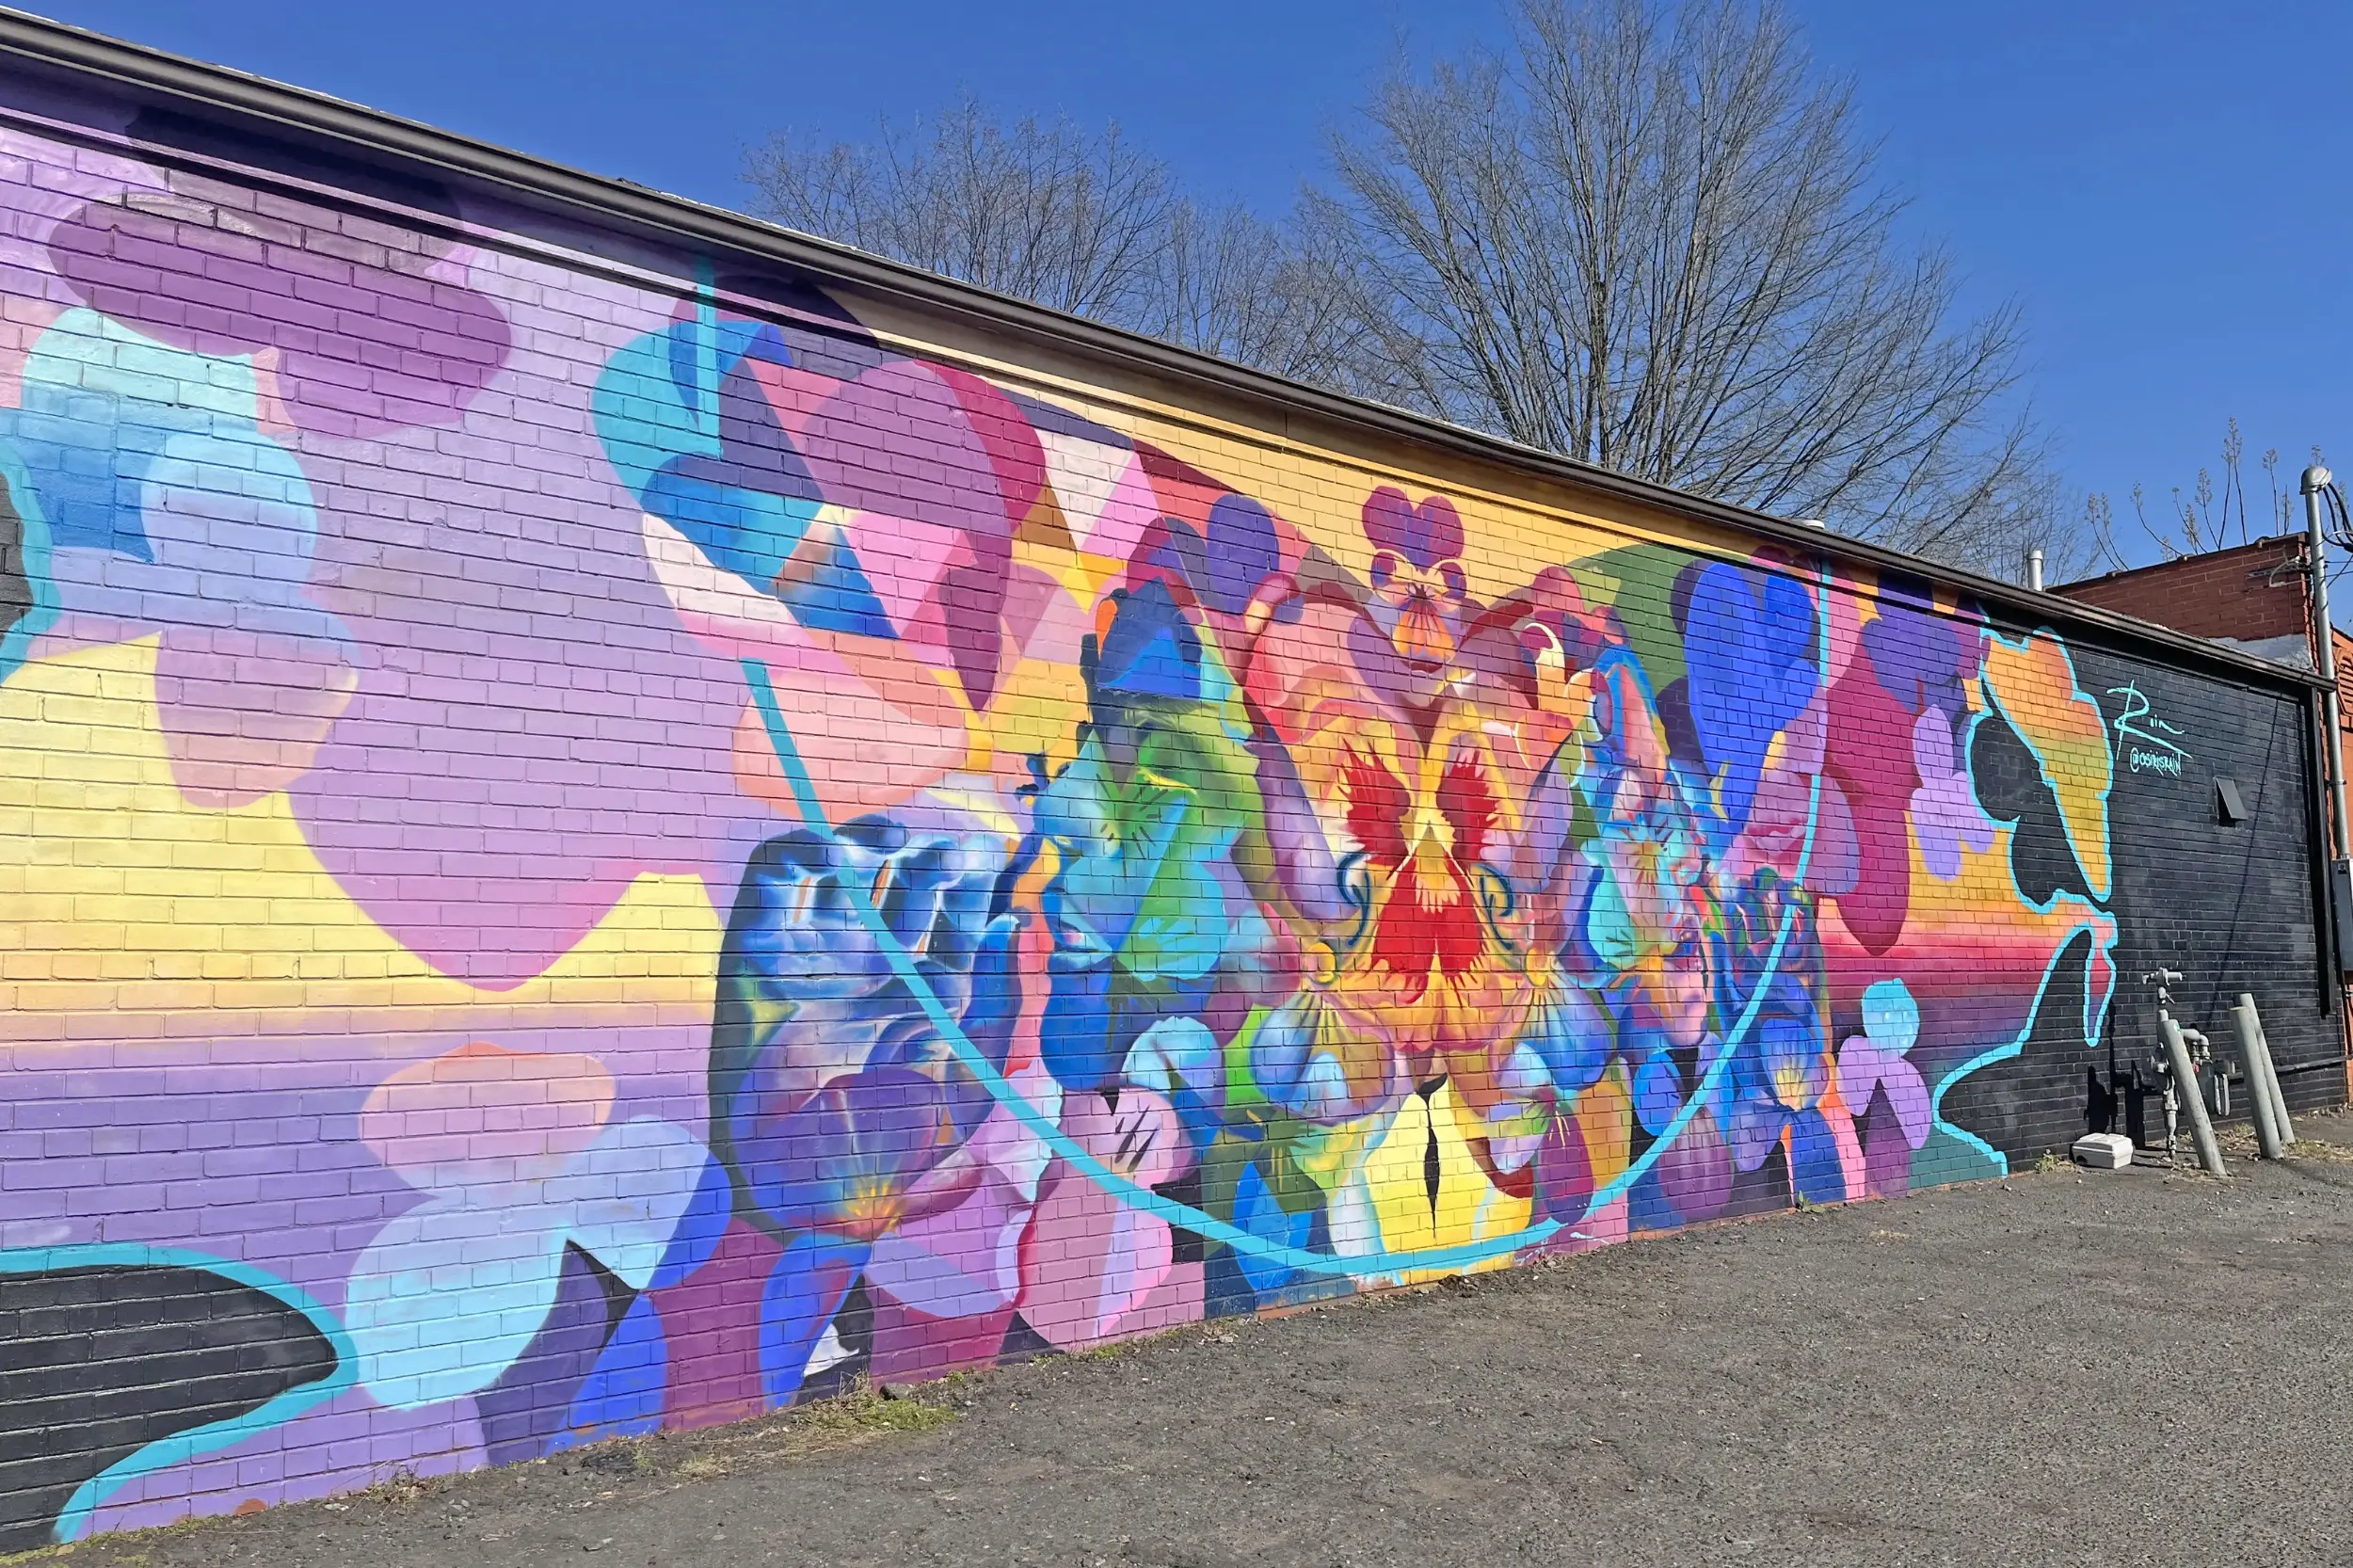 Cover photo for the blog on things to do in NoDa Charlotte by Inspired Backpacker blog. The photo is of a mural in NoDa, created by Osiris Rain